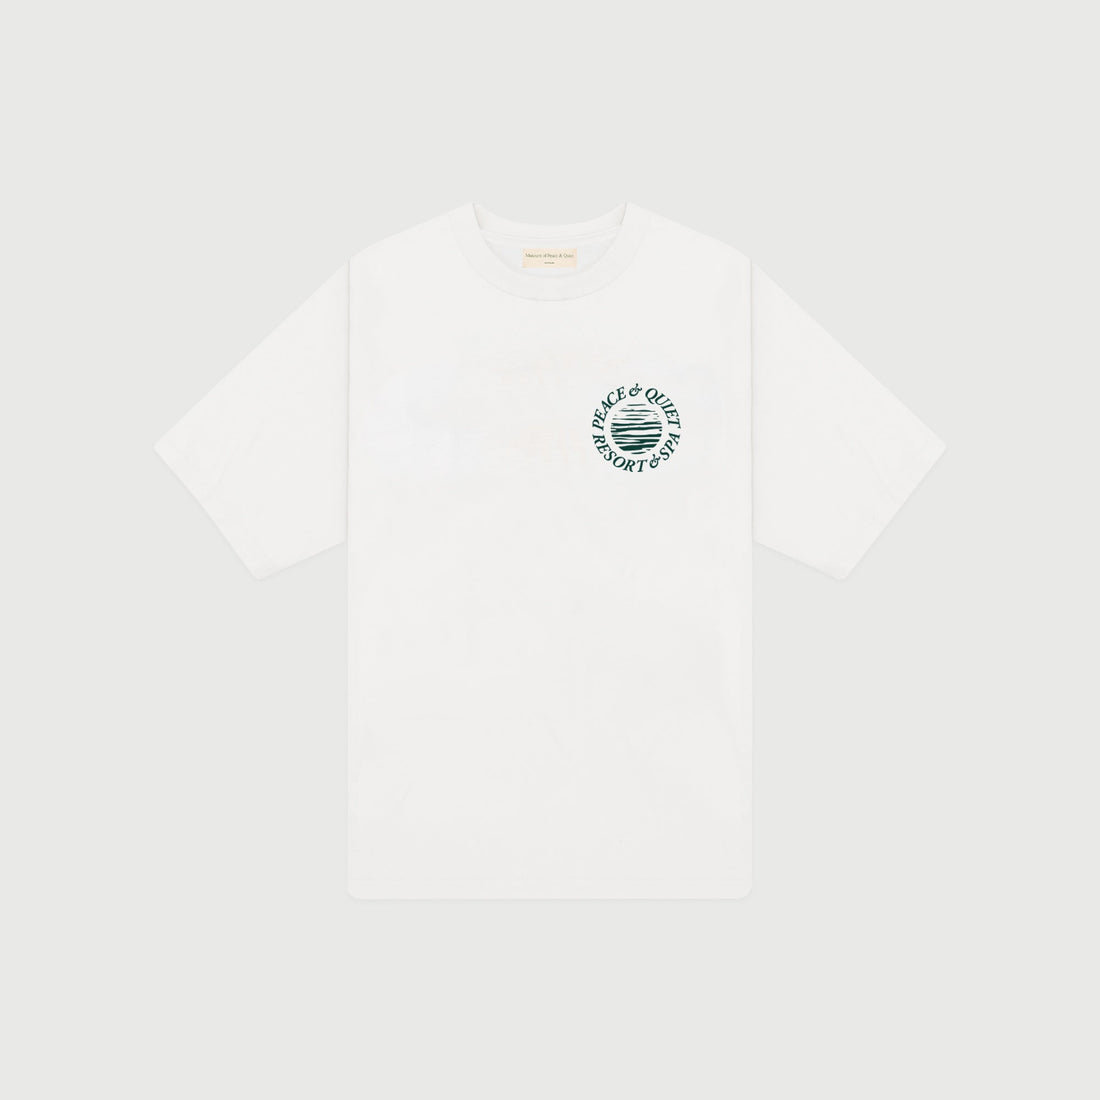 MUSEUM OF PEACE AND QUIET -  RESORT & SPA TEE - WHITE